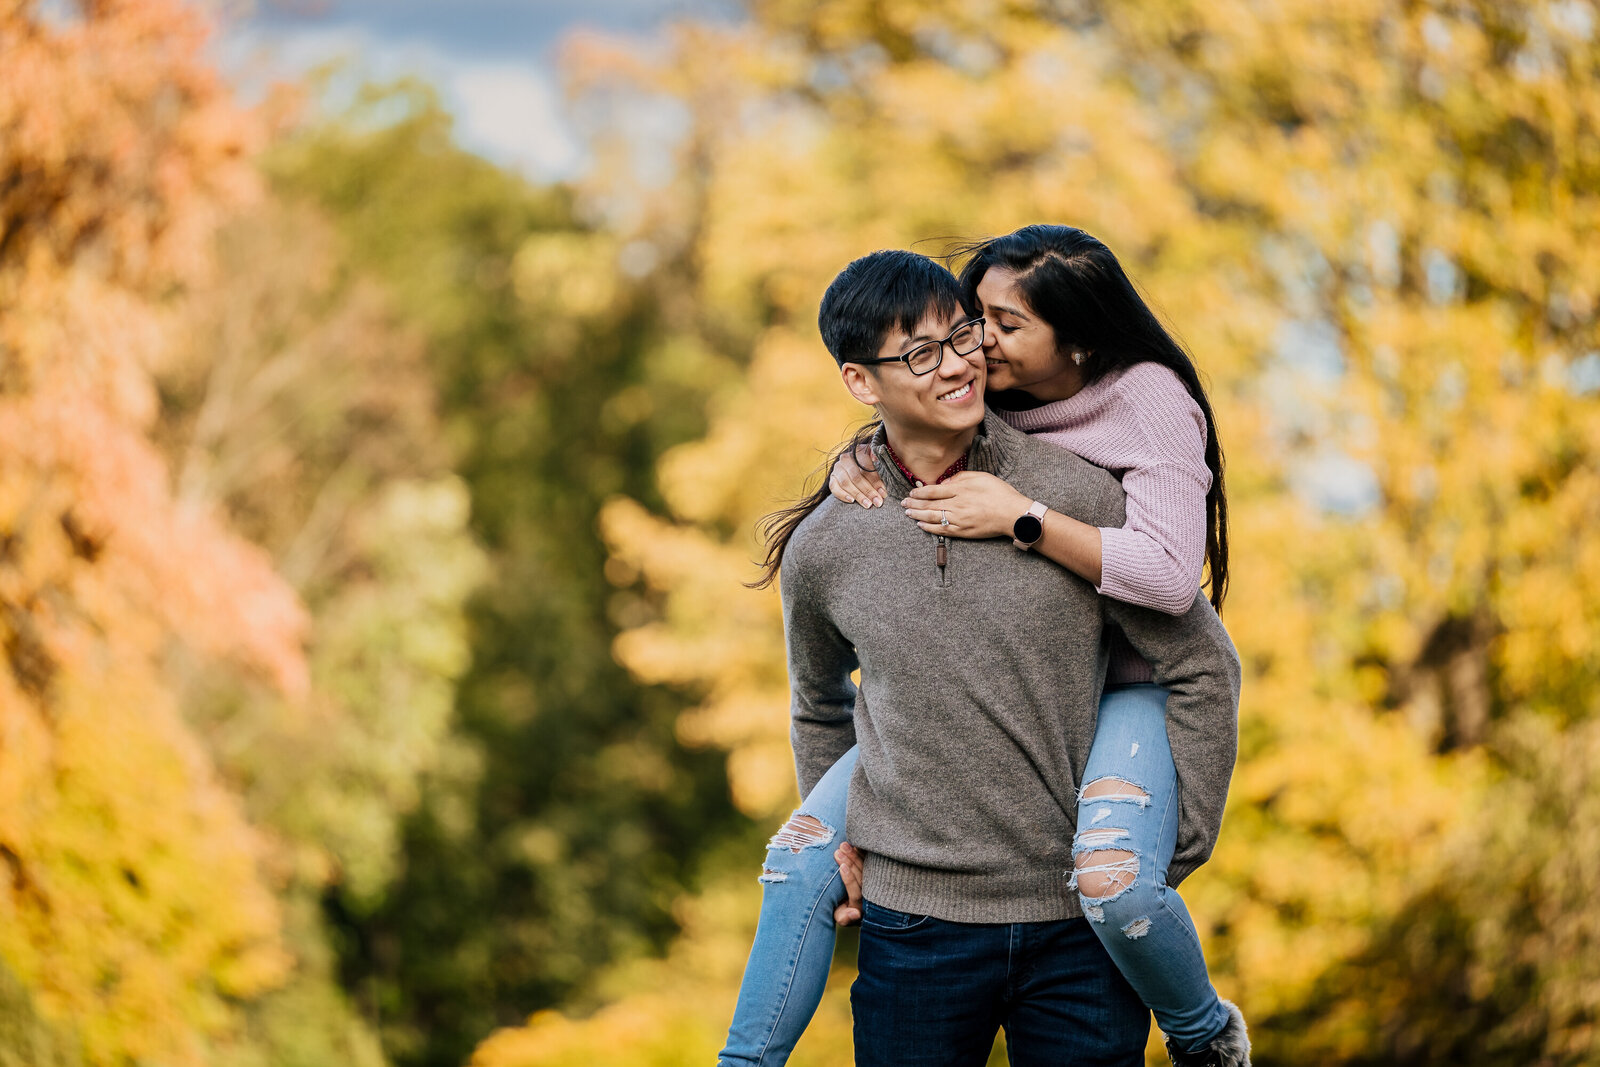 Capture the vibrant colors of fall in your NJ/NY engagement session with Ishan Fotografi.